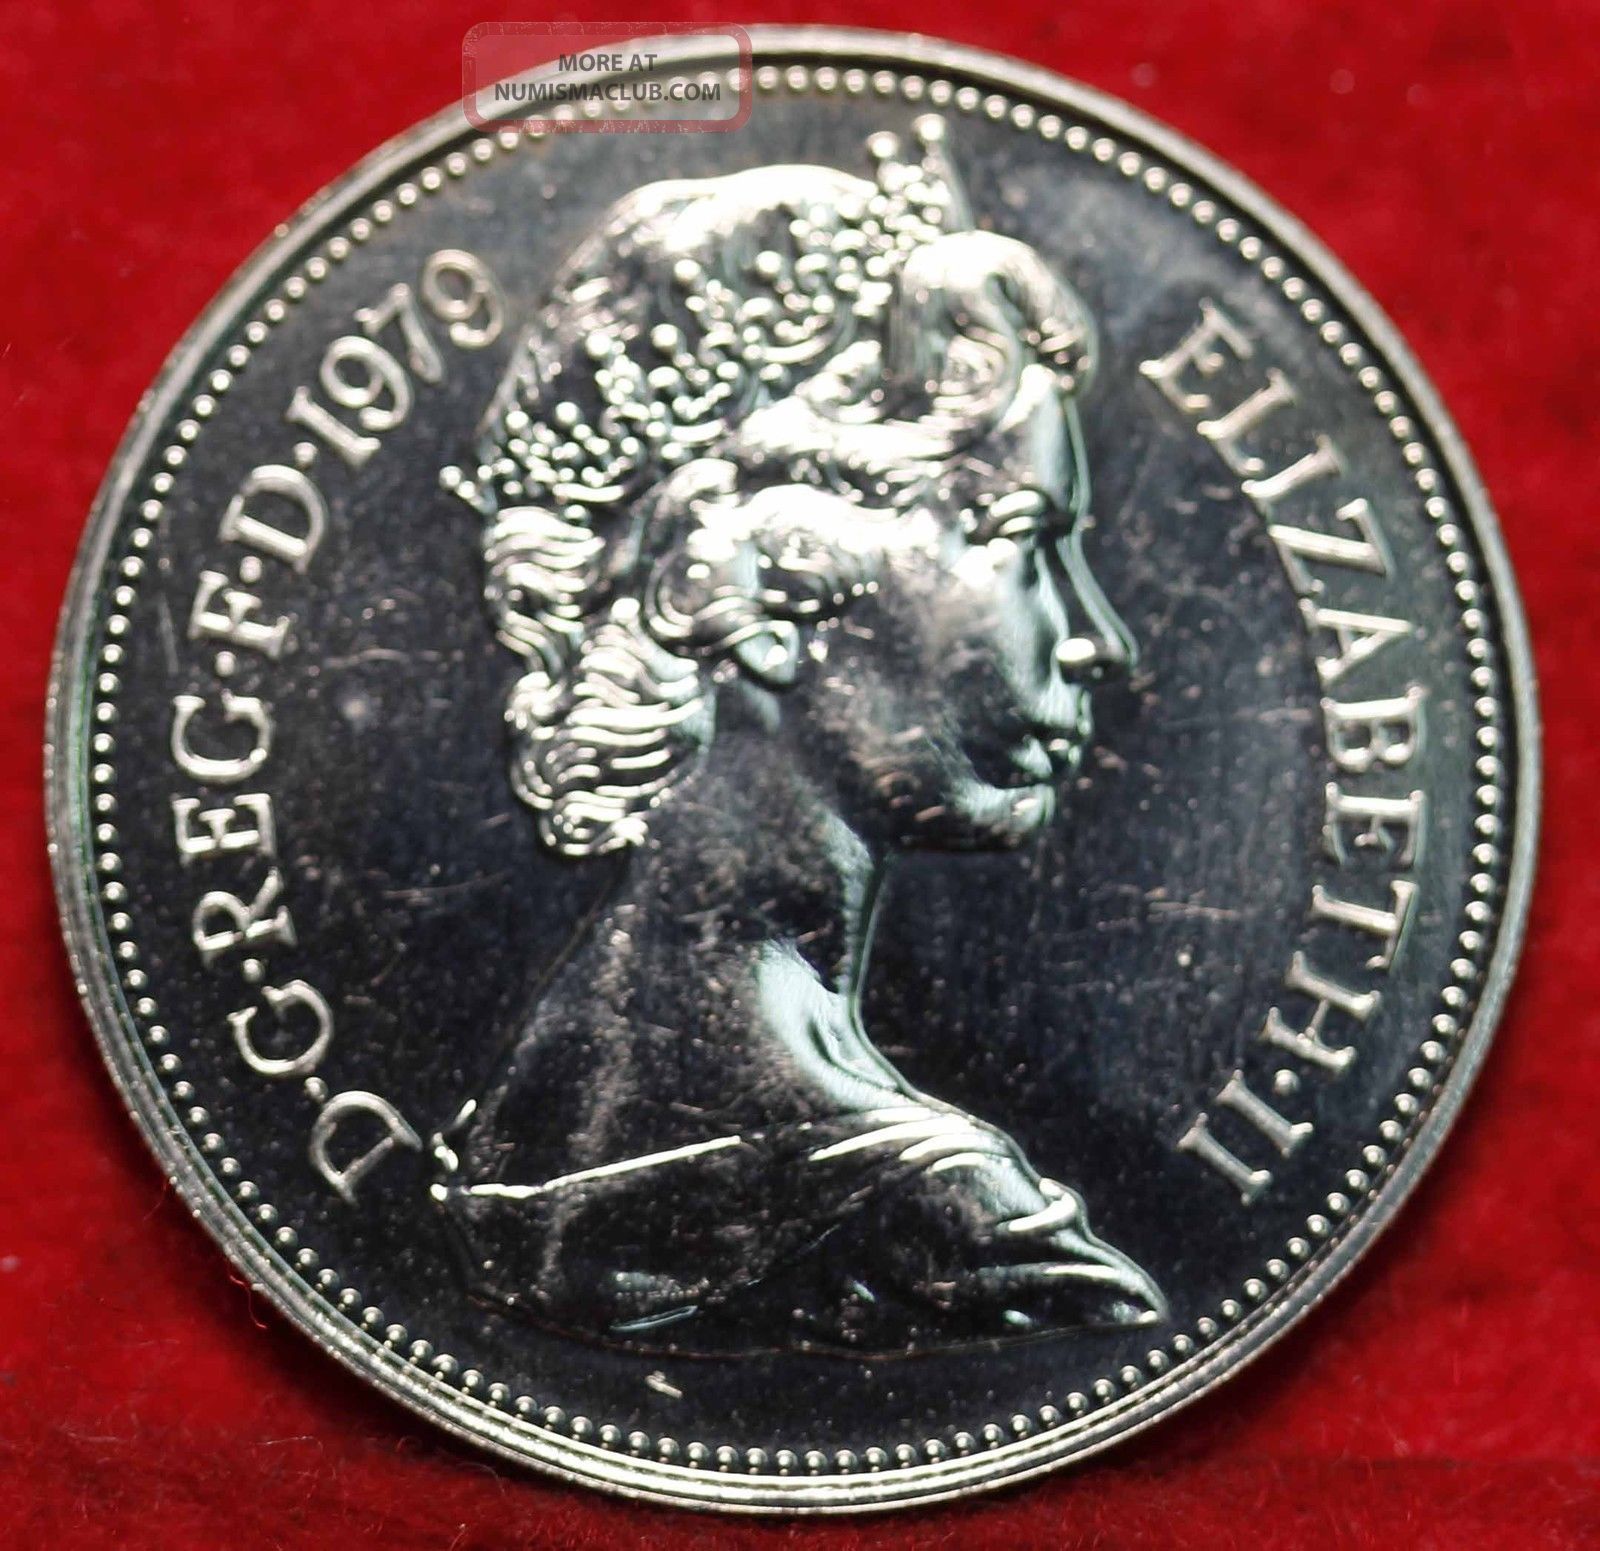 Uncirculated 1979 Great Britain 10 Pence Silver Foreign Coin S/h